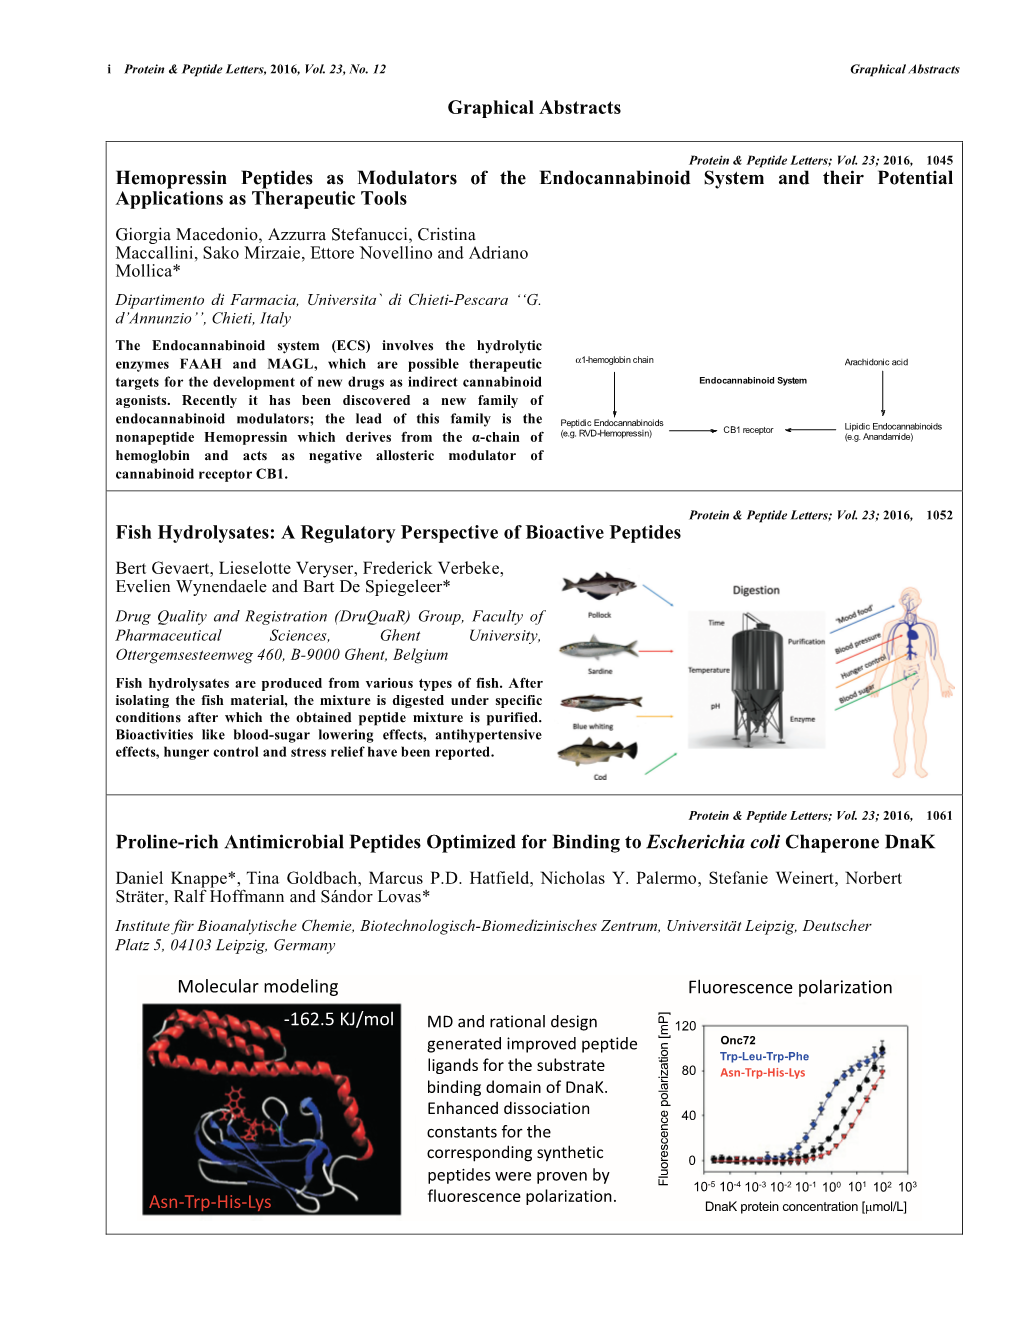 Graphical Abstracts Hemopressin Peptides As Modulators of the Endocannabinoid System and Their Potential Applications As Therape